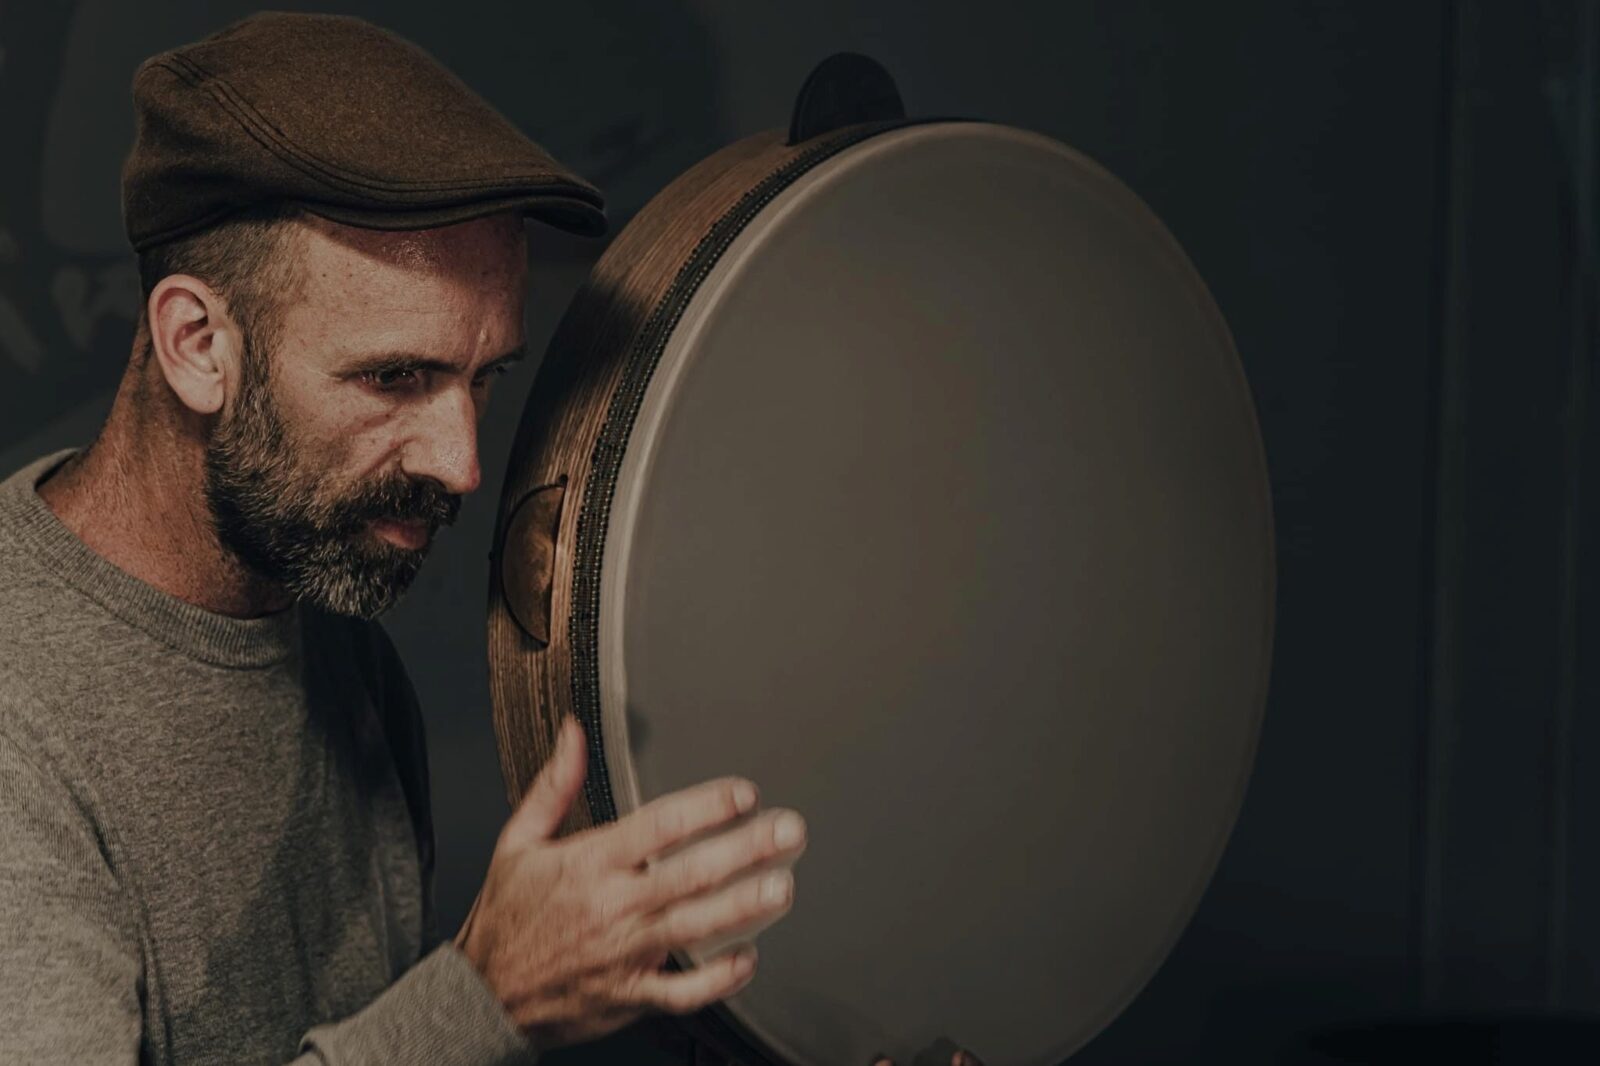 Man with drum